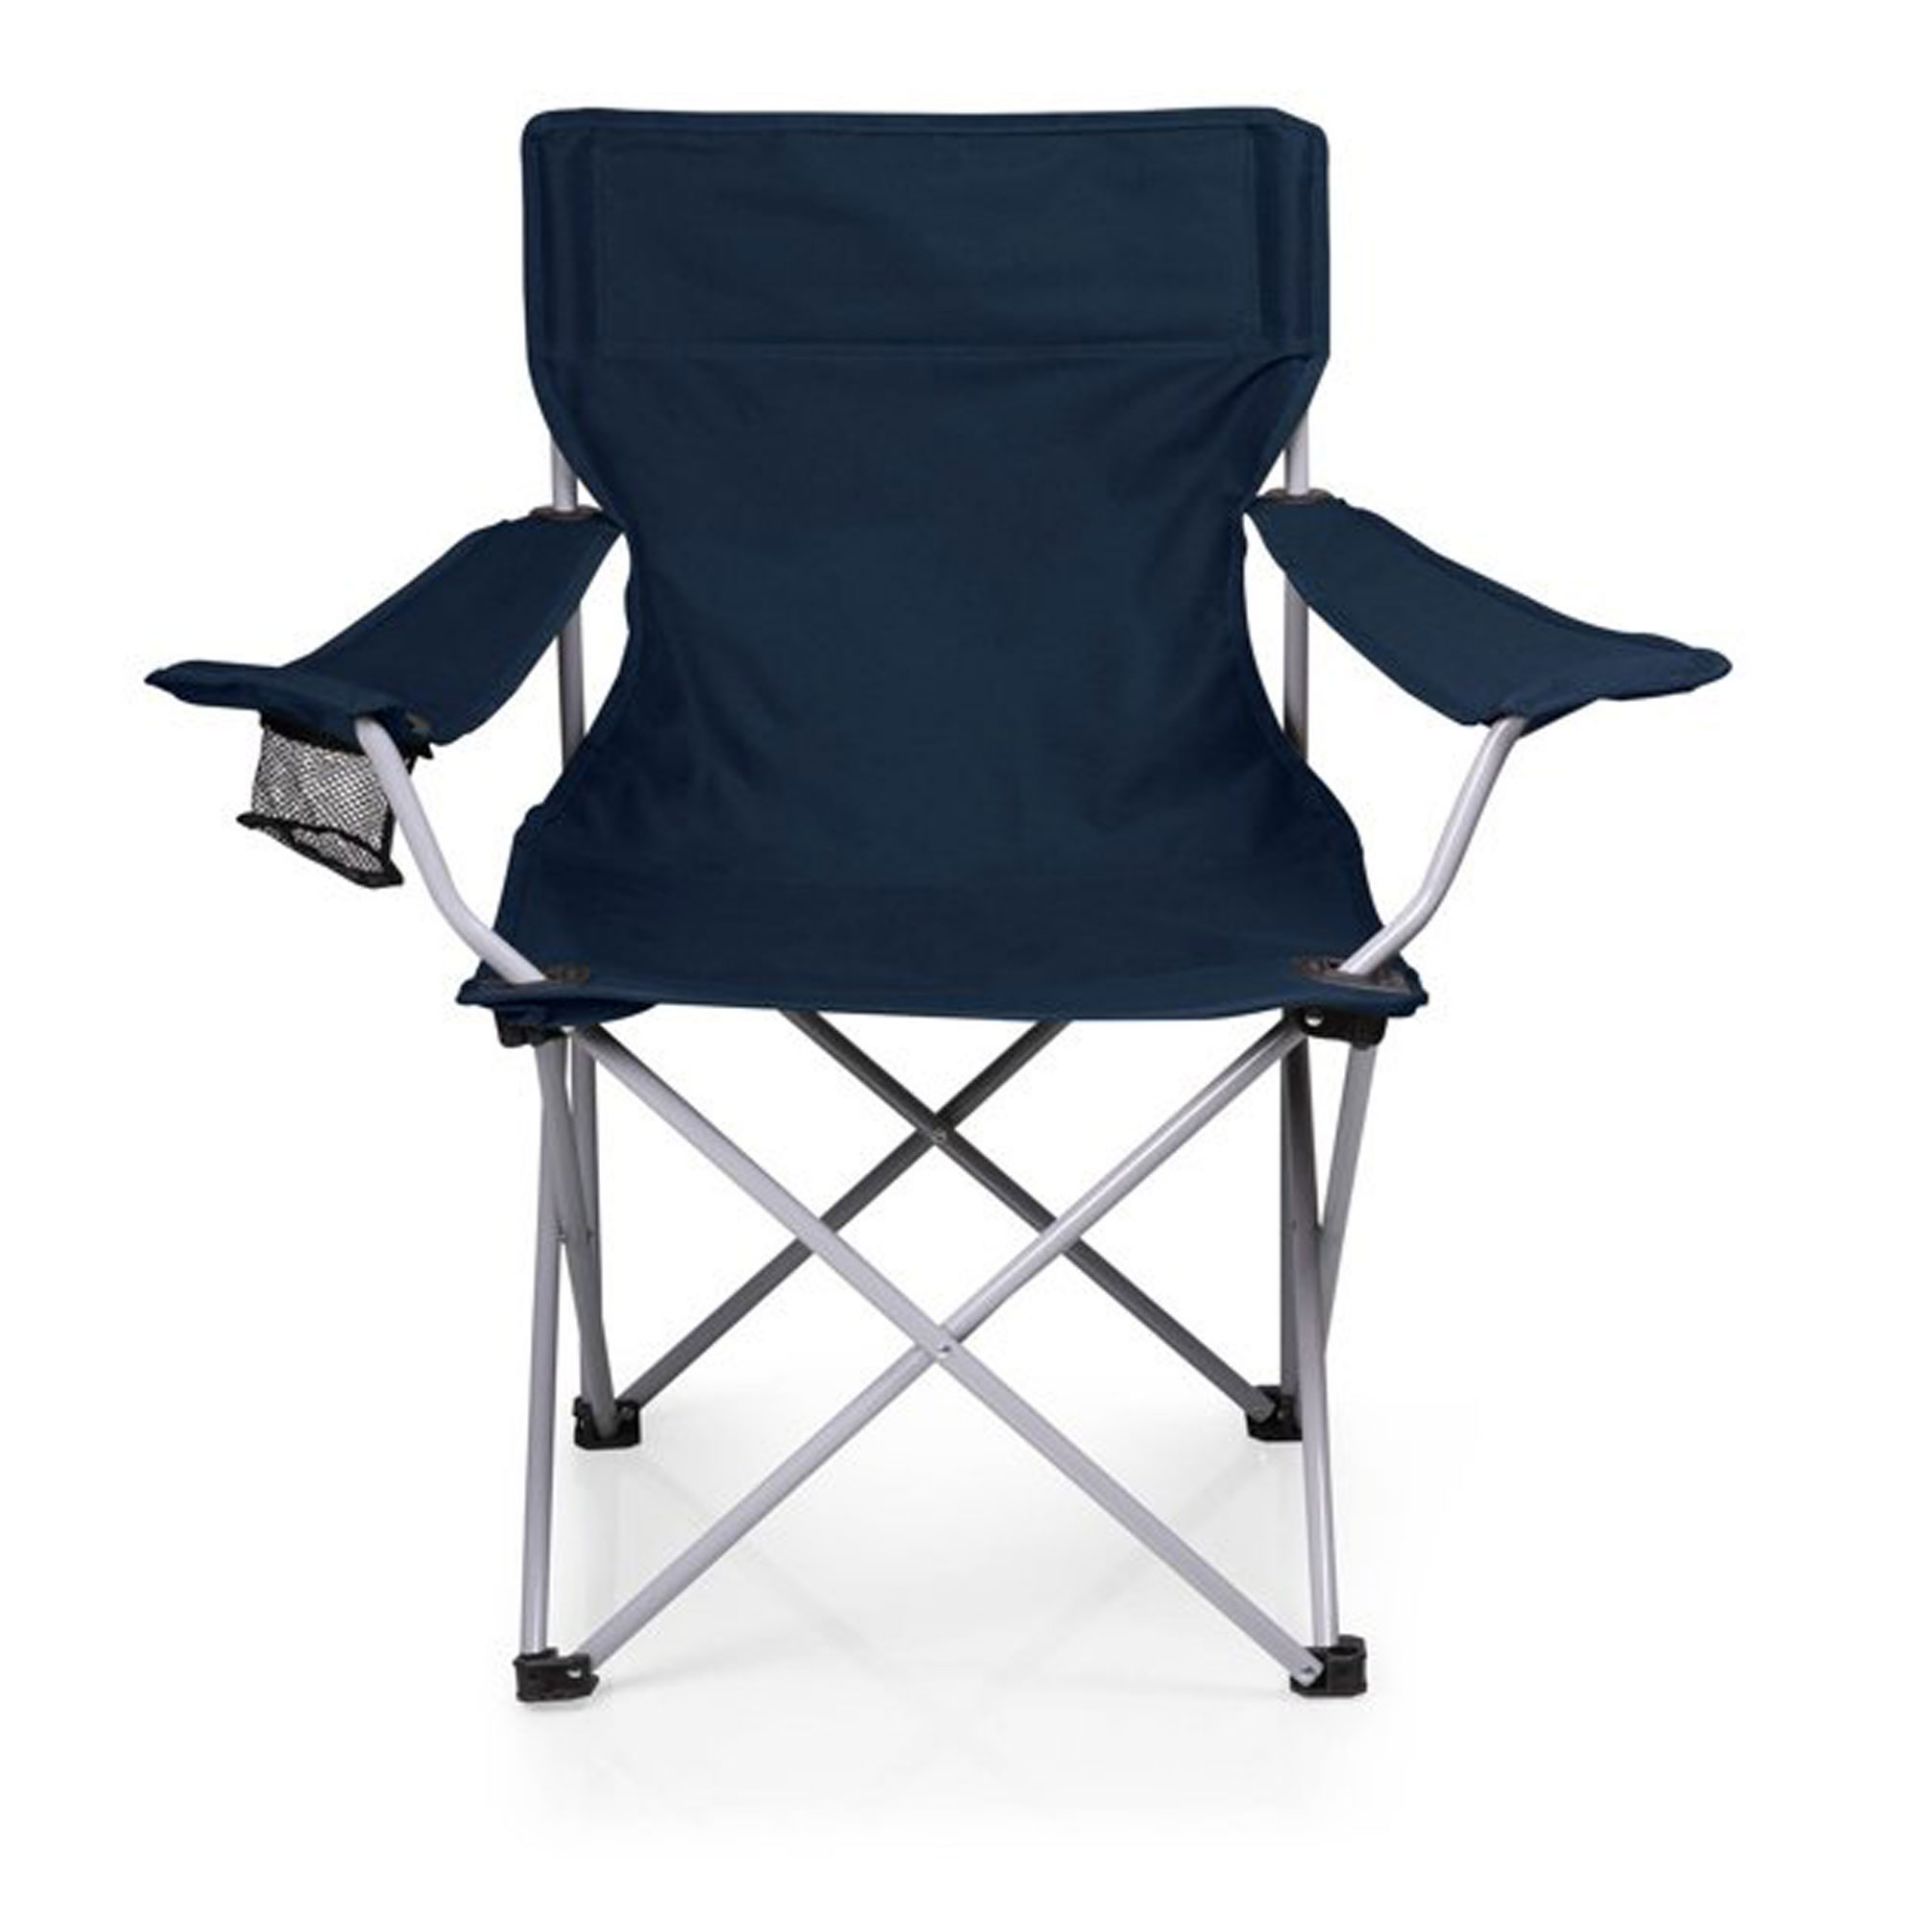 UNITS - RBSM CAMPING FOLDING CHAIRS W/ CARRYING BAGS - NAVY BLUE (NEW) (MSRP $75) - Image 3 of 4